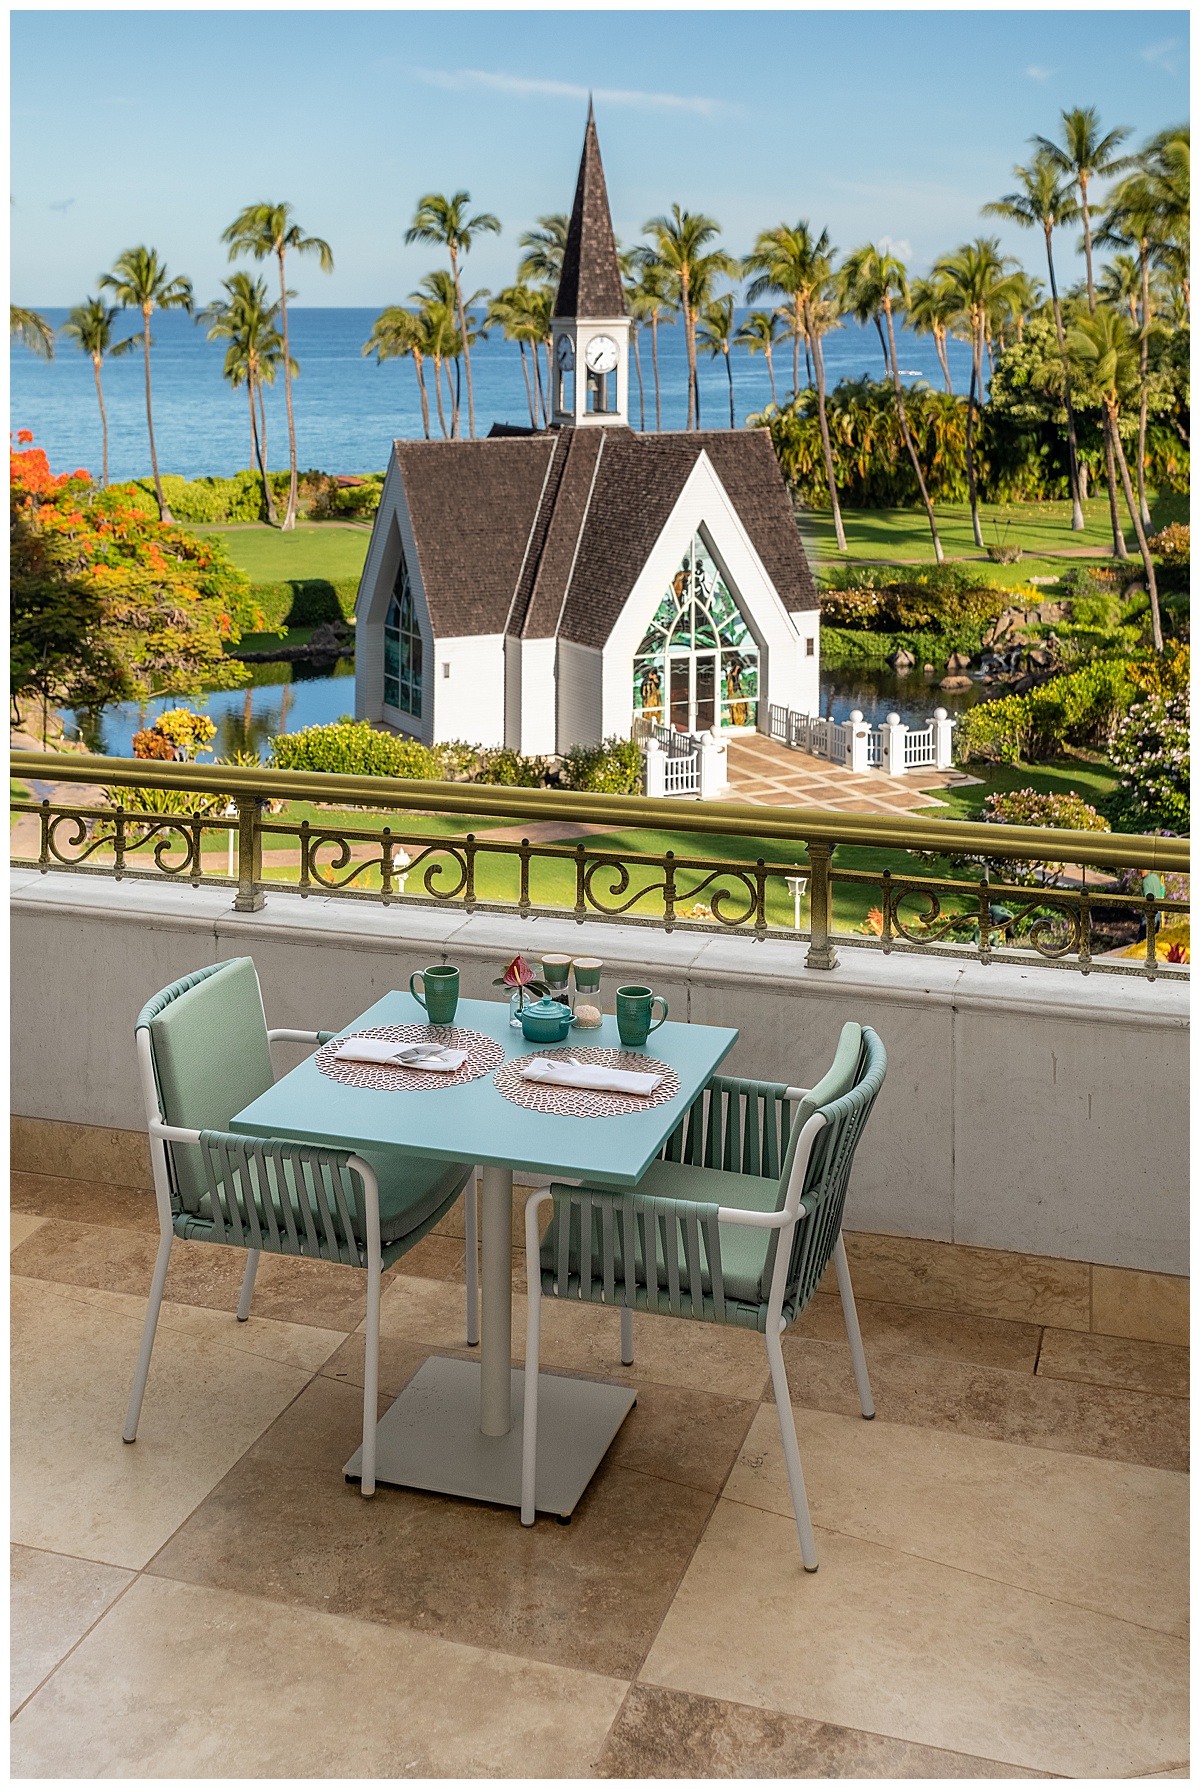 A view from one of the tables at the restaurant. The table and chairs are teal. The table looks over the railing at the resort's wedding chapel, green lawn, and blue ocean.